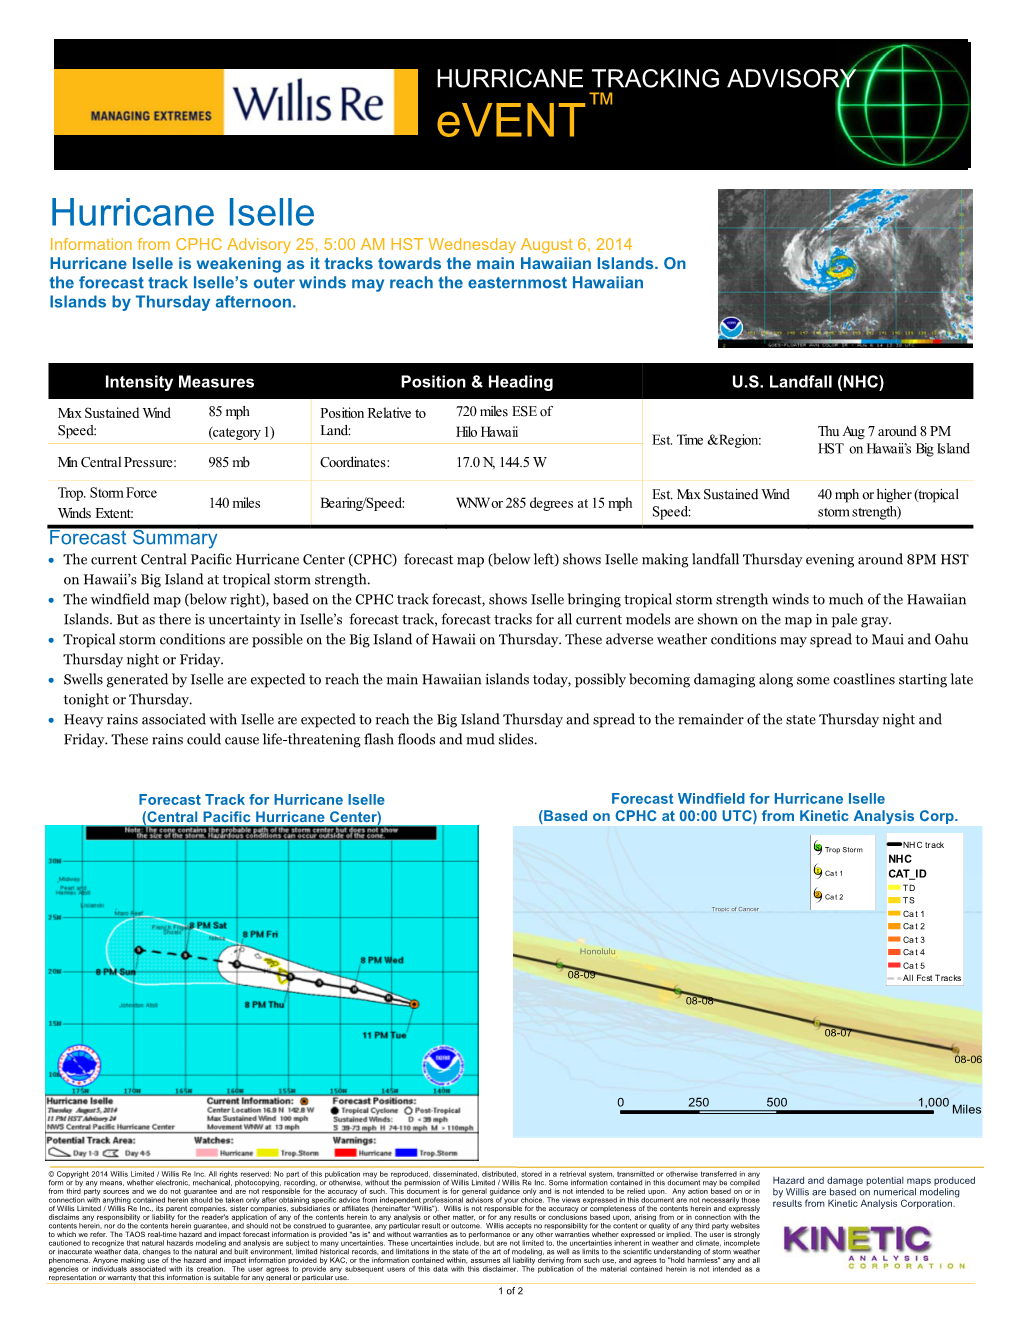 Hurricane Iselle Information from CPHC Advisory 25, 5:00 AM HST Wednesday August 6, 2014 Hurricane Iselle Is Weakening As It Tracks Towards the Main Hawaiian Islands